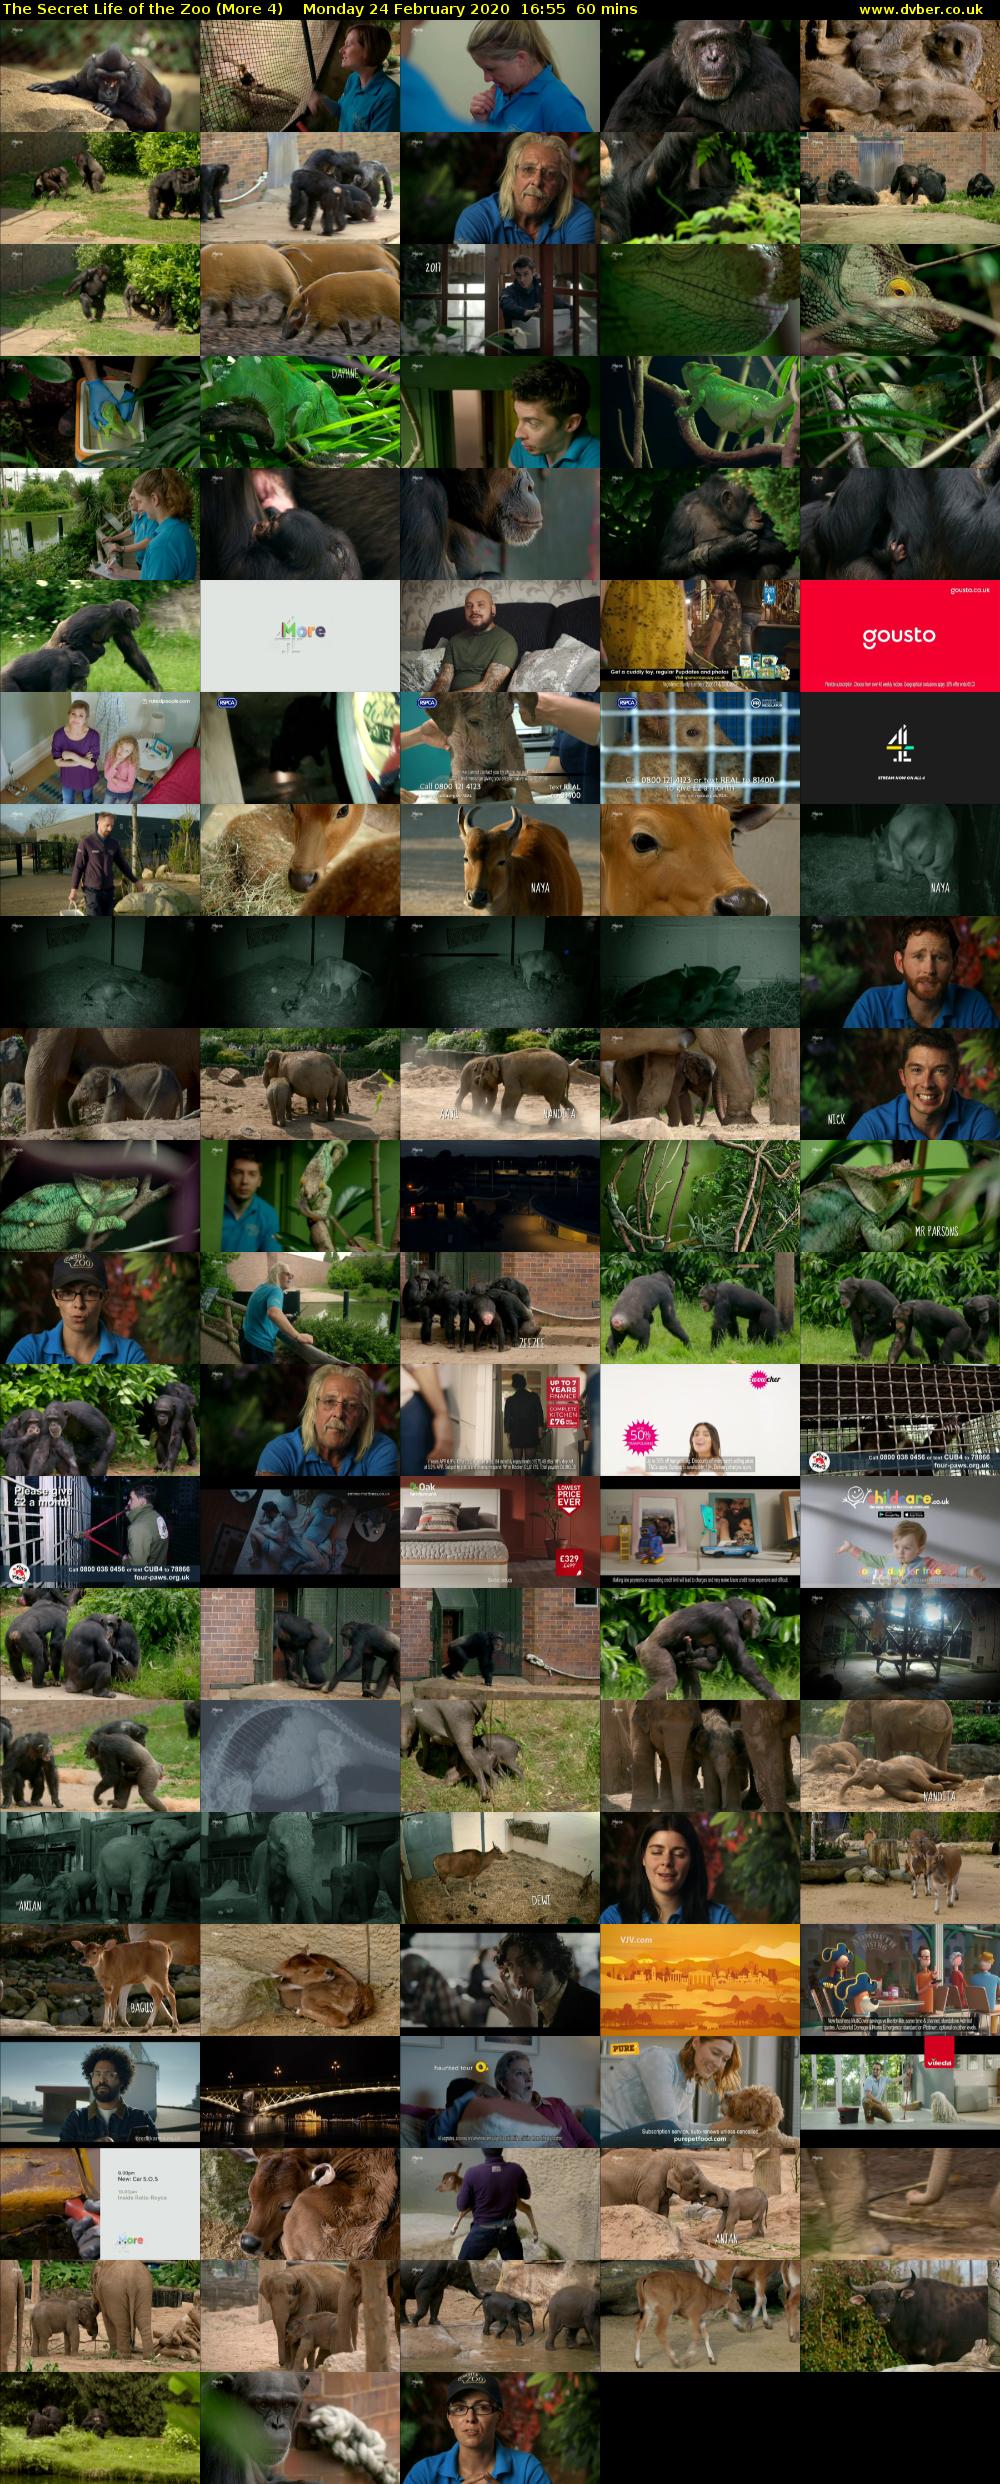 The Secret Life of the Zoo (More 4) Monday 24 February 2020 16:55 - 17:55